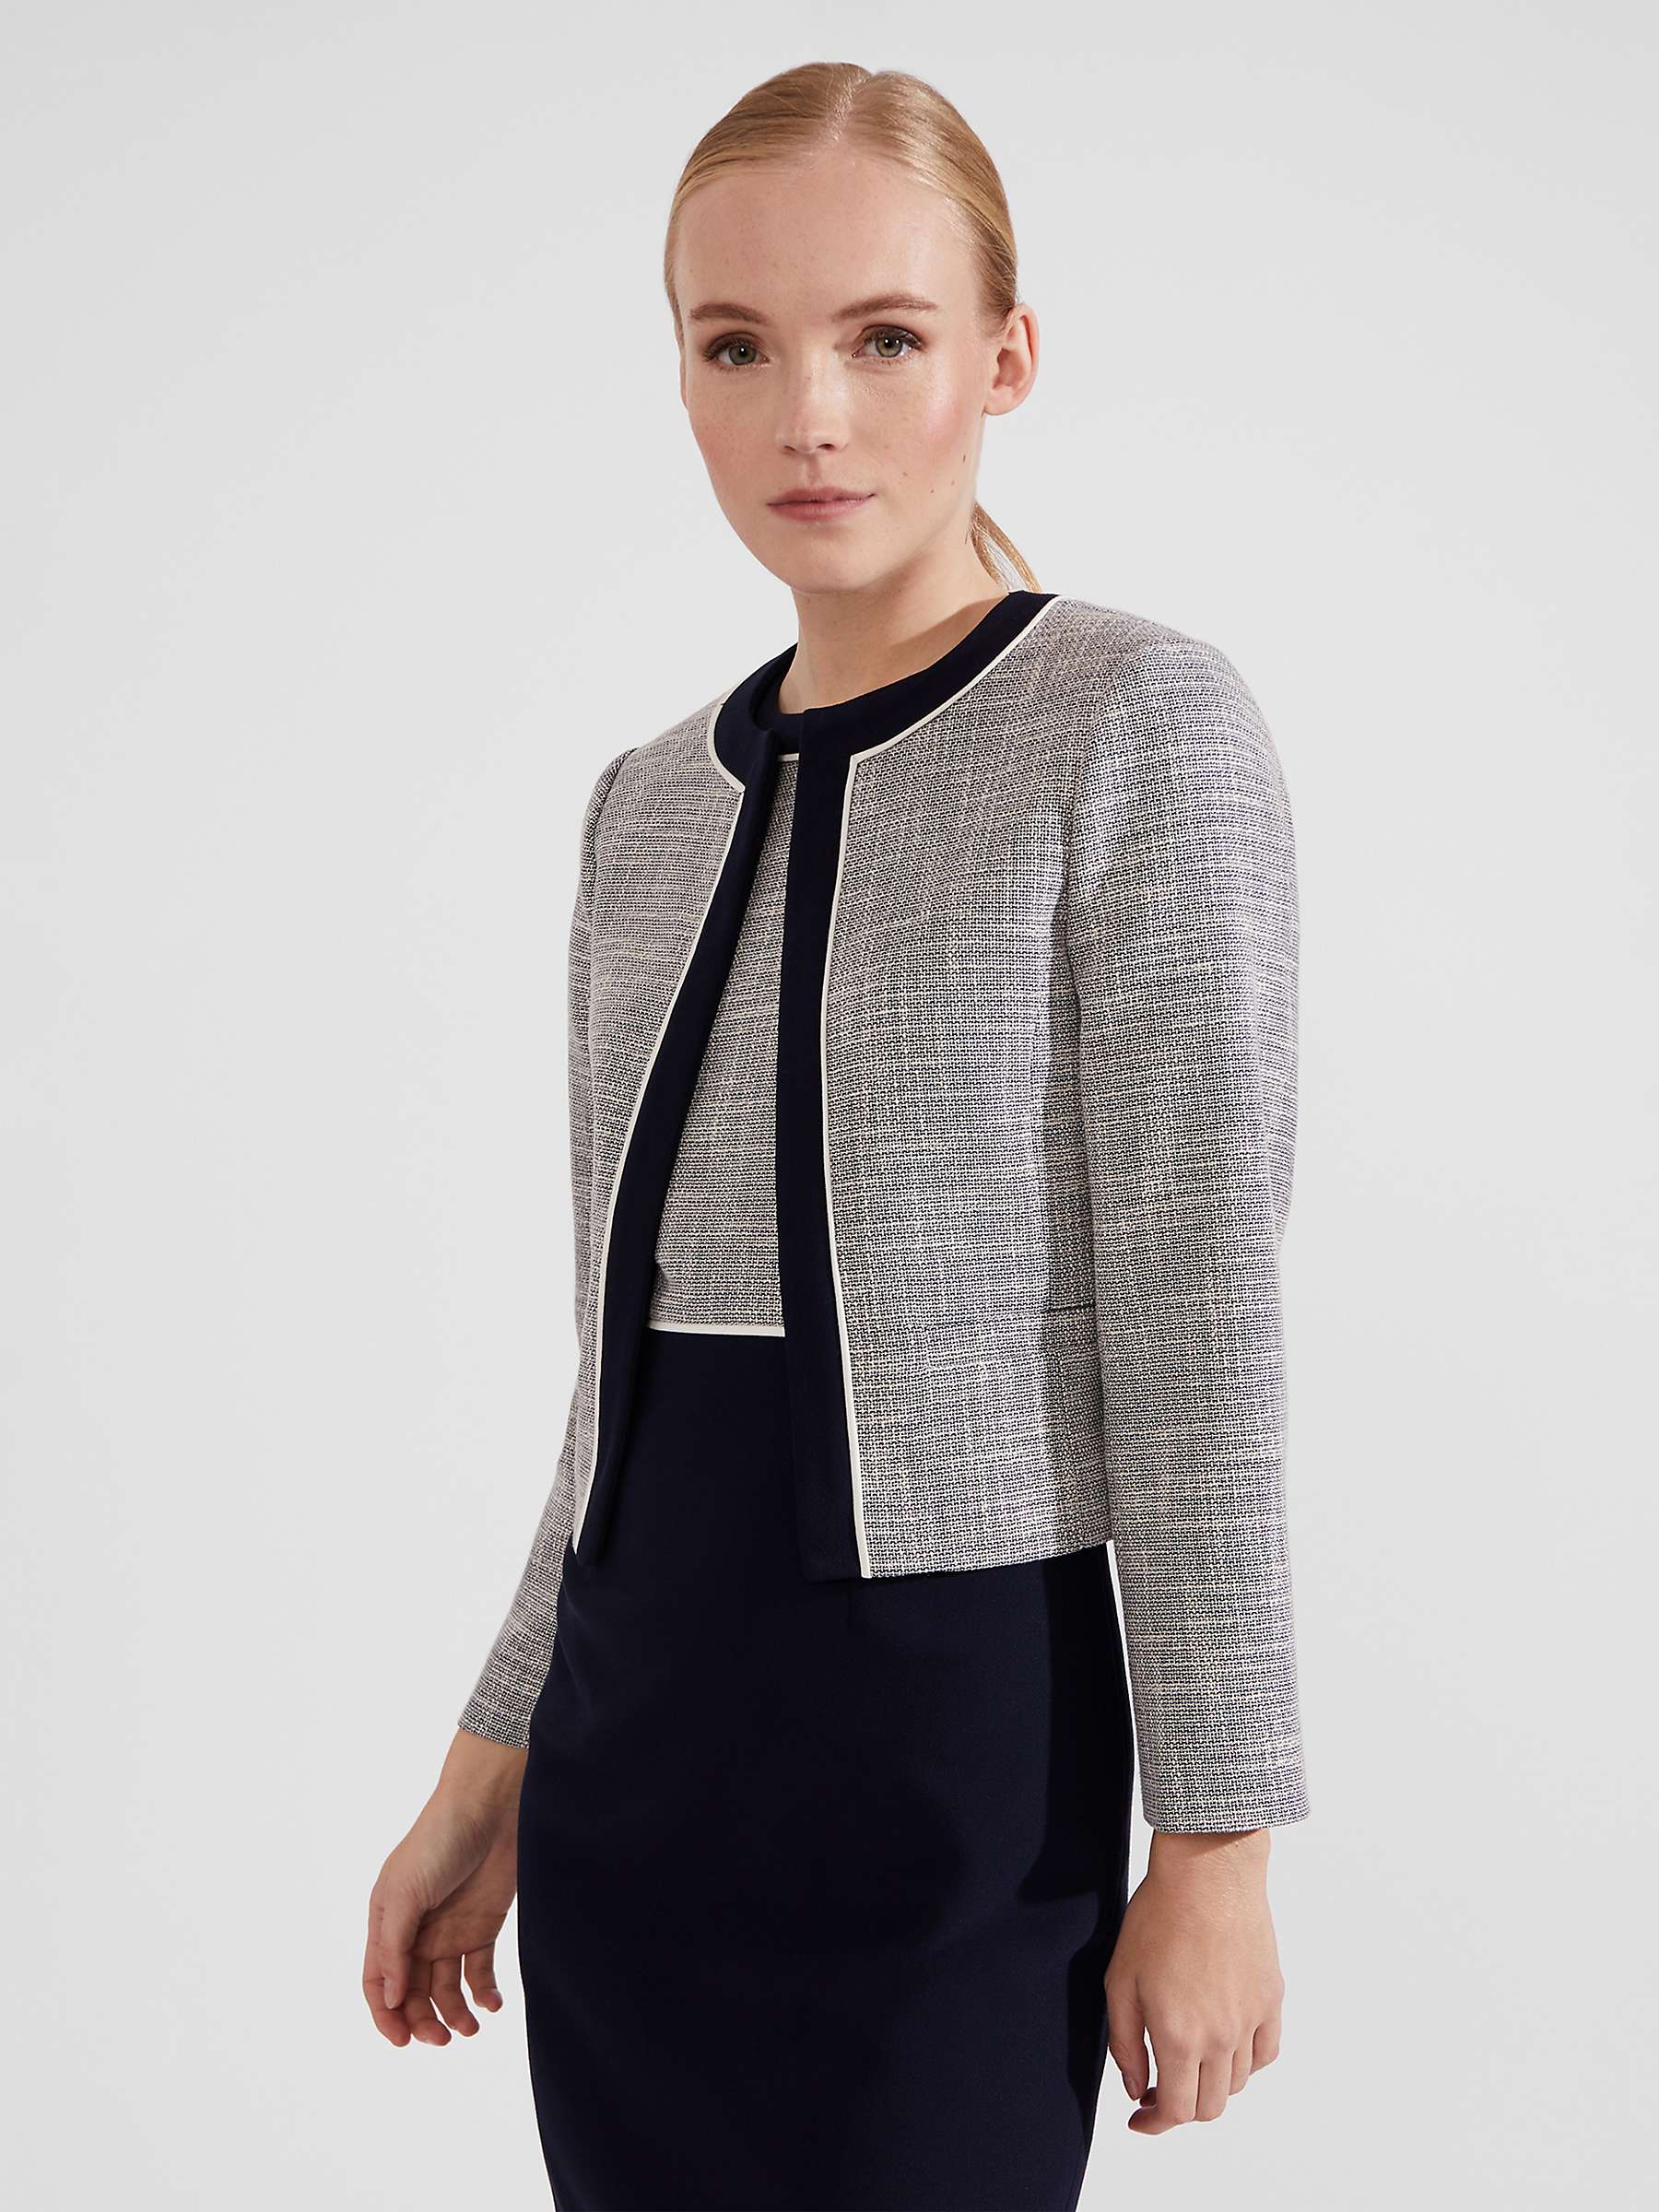 Buy Hobbs Laurie Cropped Blazer, Navy/Ivory Online at johnlewis.com